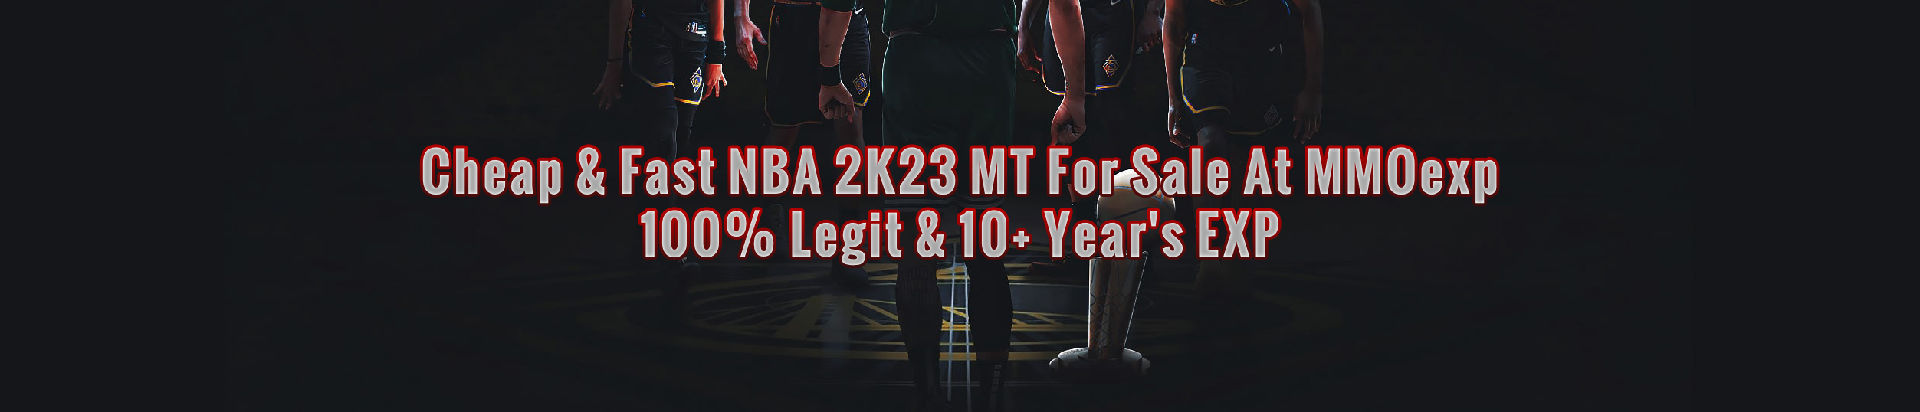 Cheap & Fast NBA 2K23 MT For Sale At MMOexp,100% L